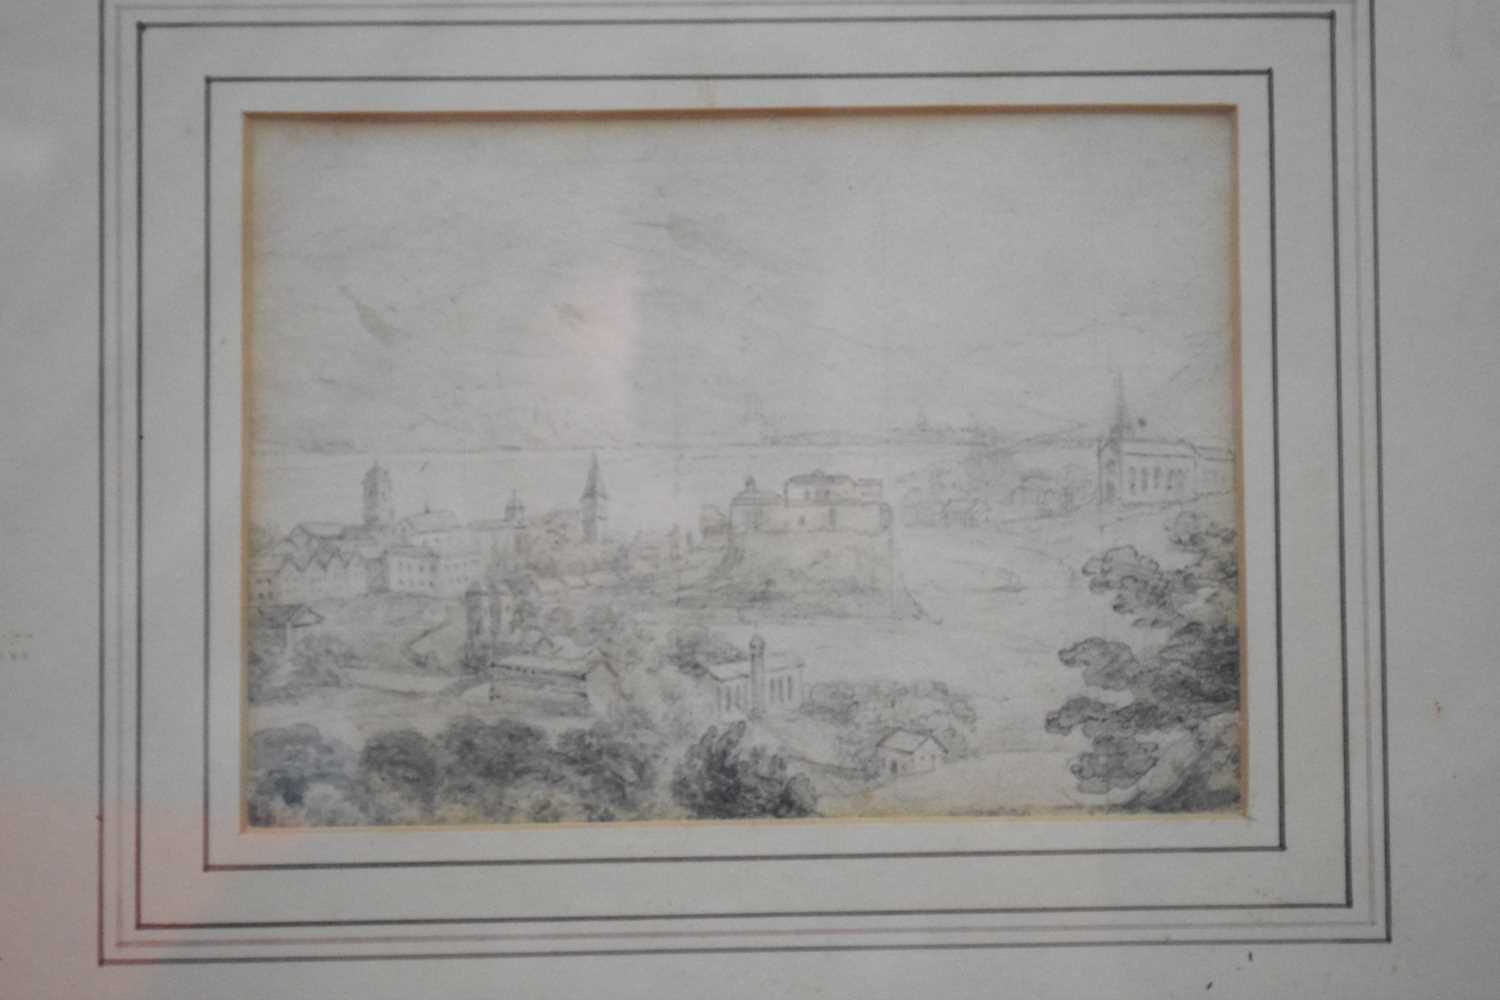 British 20th Century, Preparatory Sketch of an unidentified English Town. Pencil and wash. 4.5x6ins - Image 2 of 2